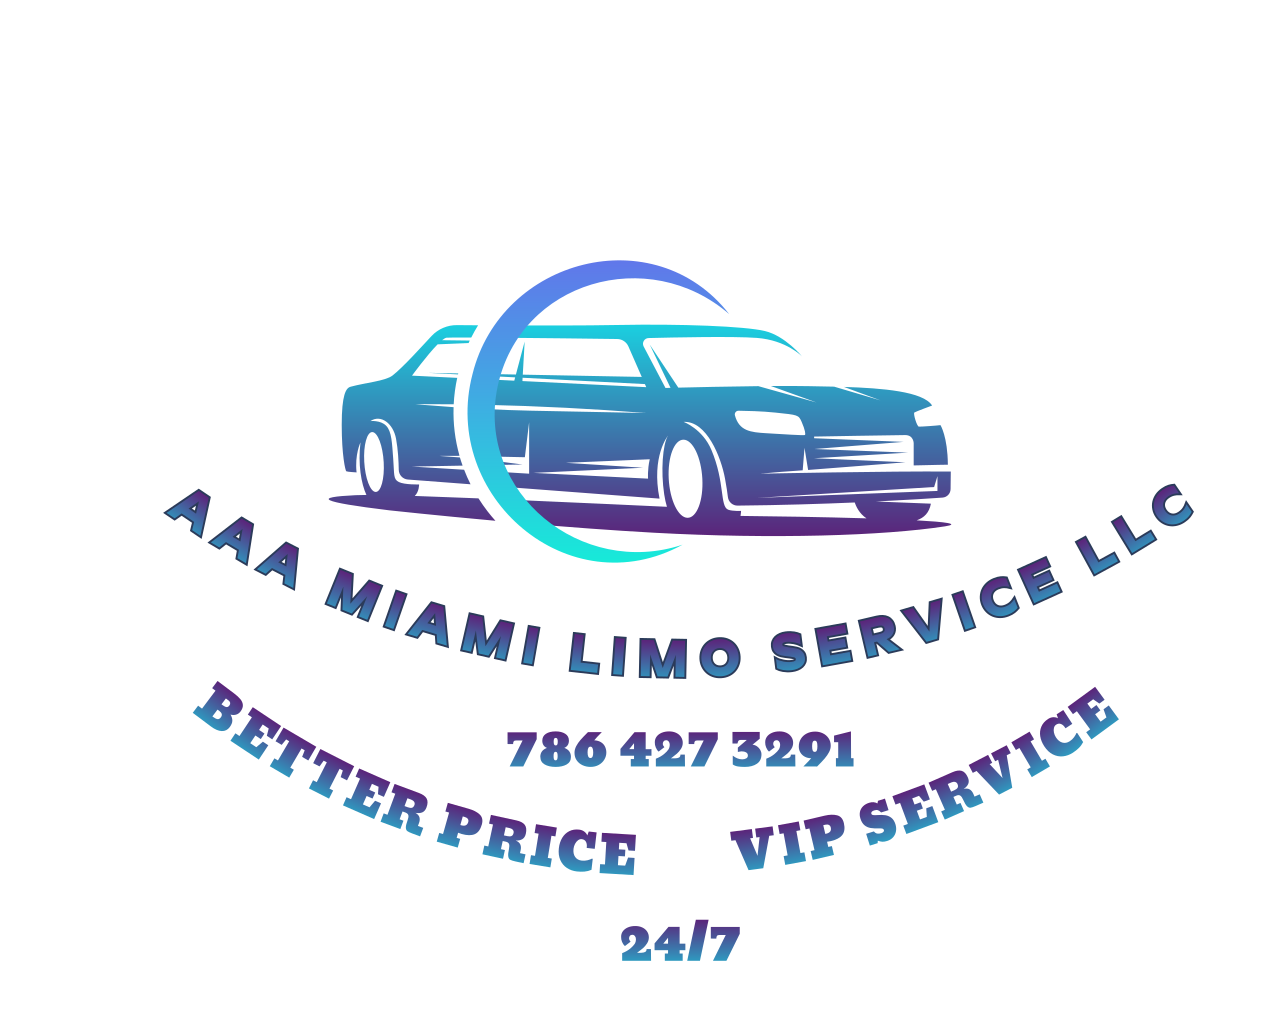 AAA MIAMI LIMO SERVICE LLC's web page